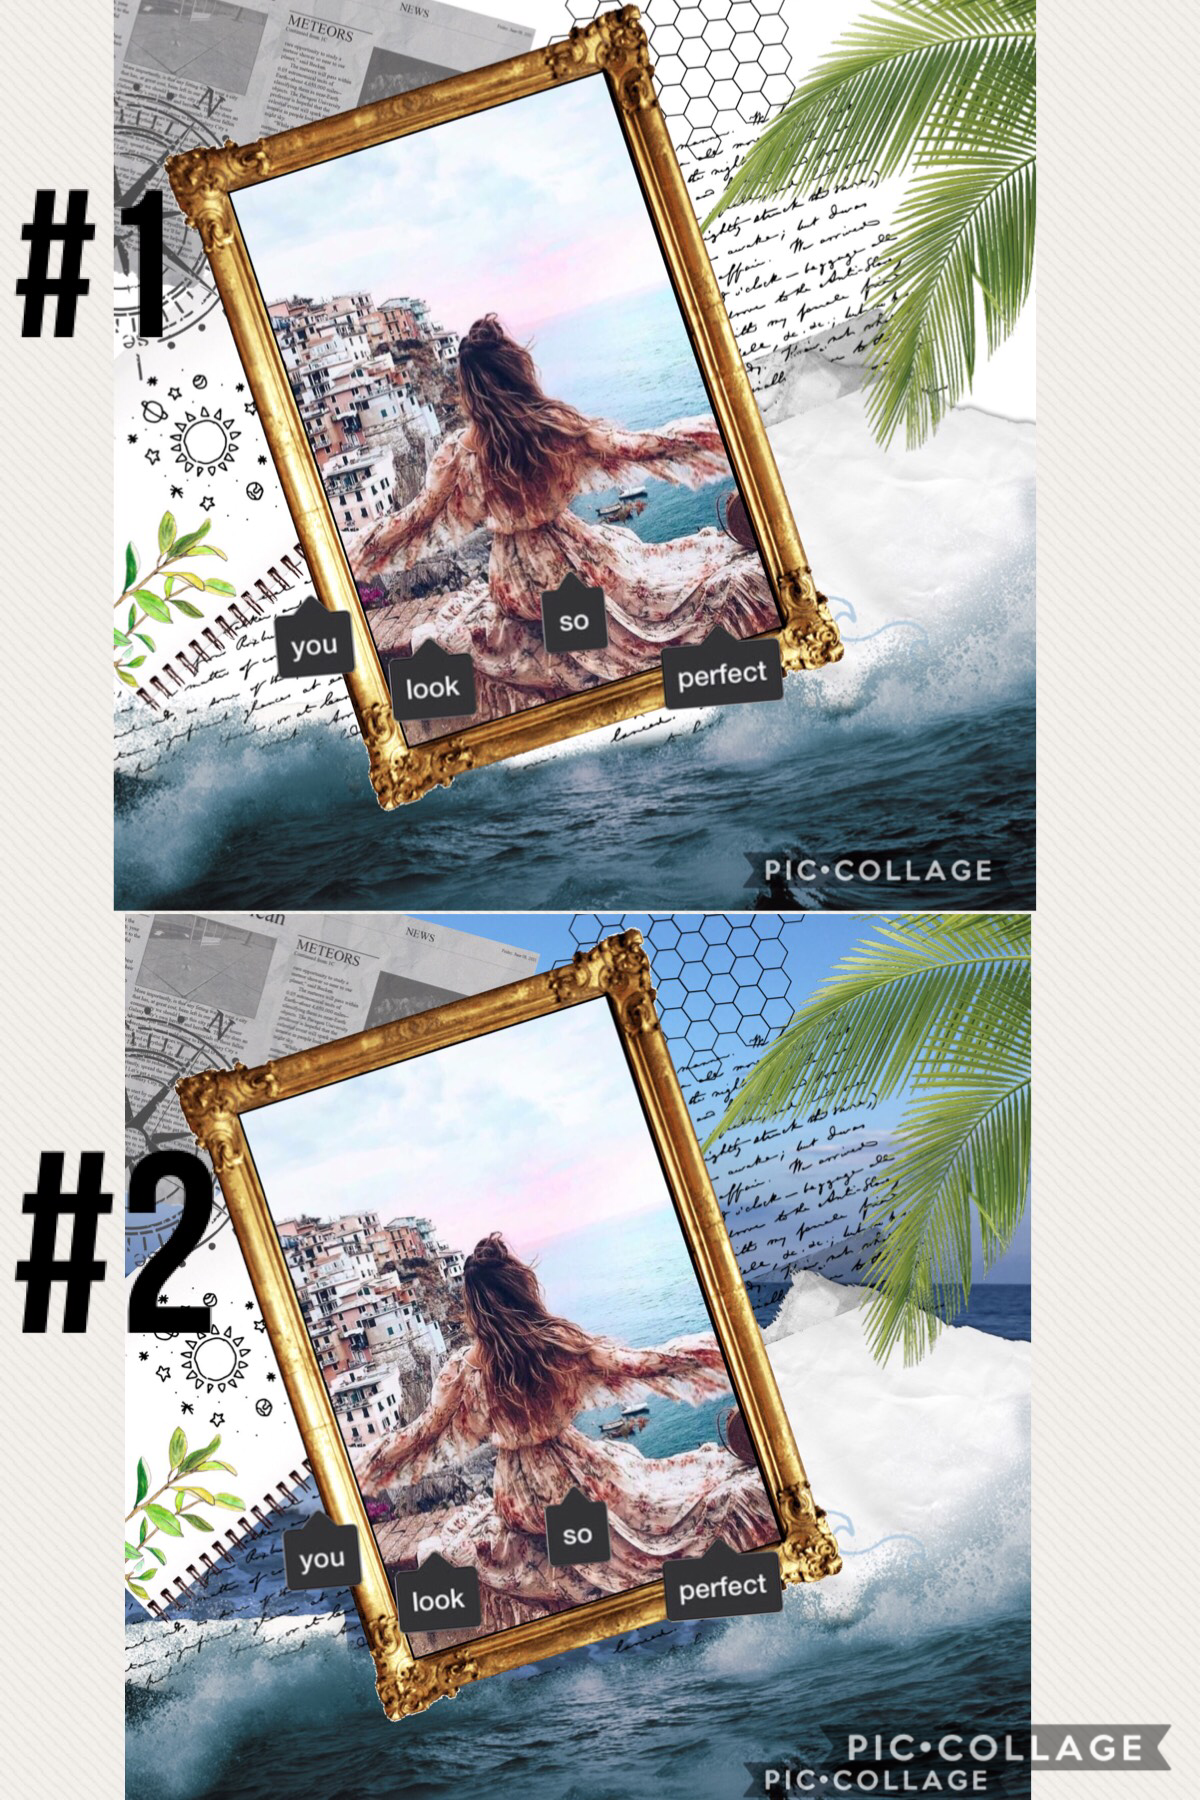 TAP 4 A POLL
Okay, so I made this today and it is NOT my style but I wanted to see what you guys think. So comment below should I post #1, #2, or not post it at all. (The difference between the two is 1 has a white BG & 2 has a ocean BG) So comment below!